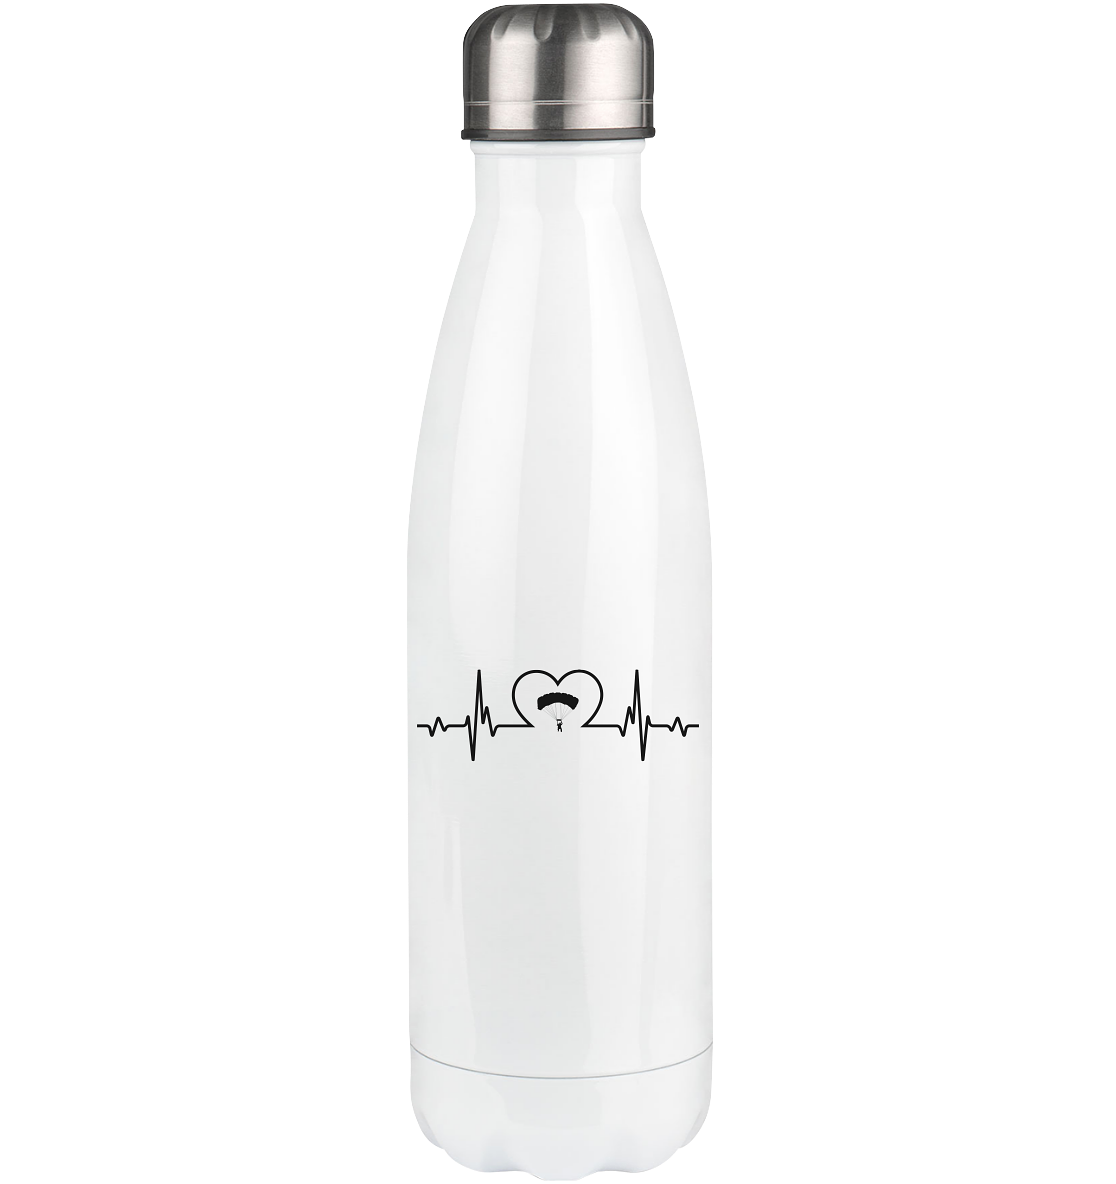 Heartbeat Heart and Paragliding - Edelstahl Thermosflasche berge 500ml